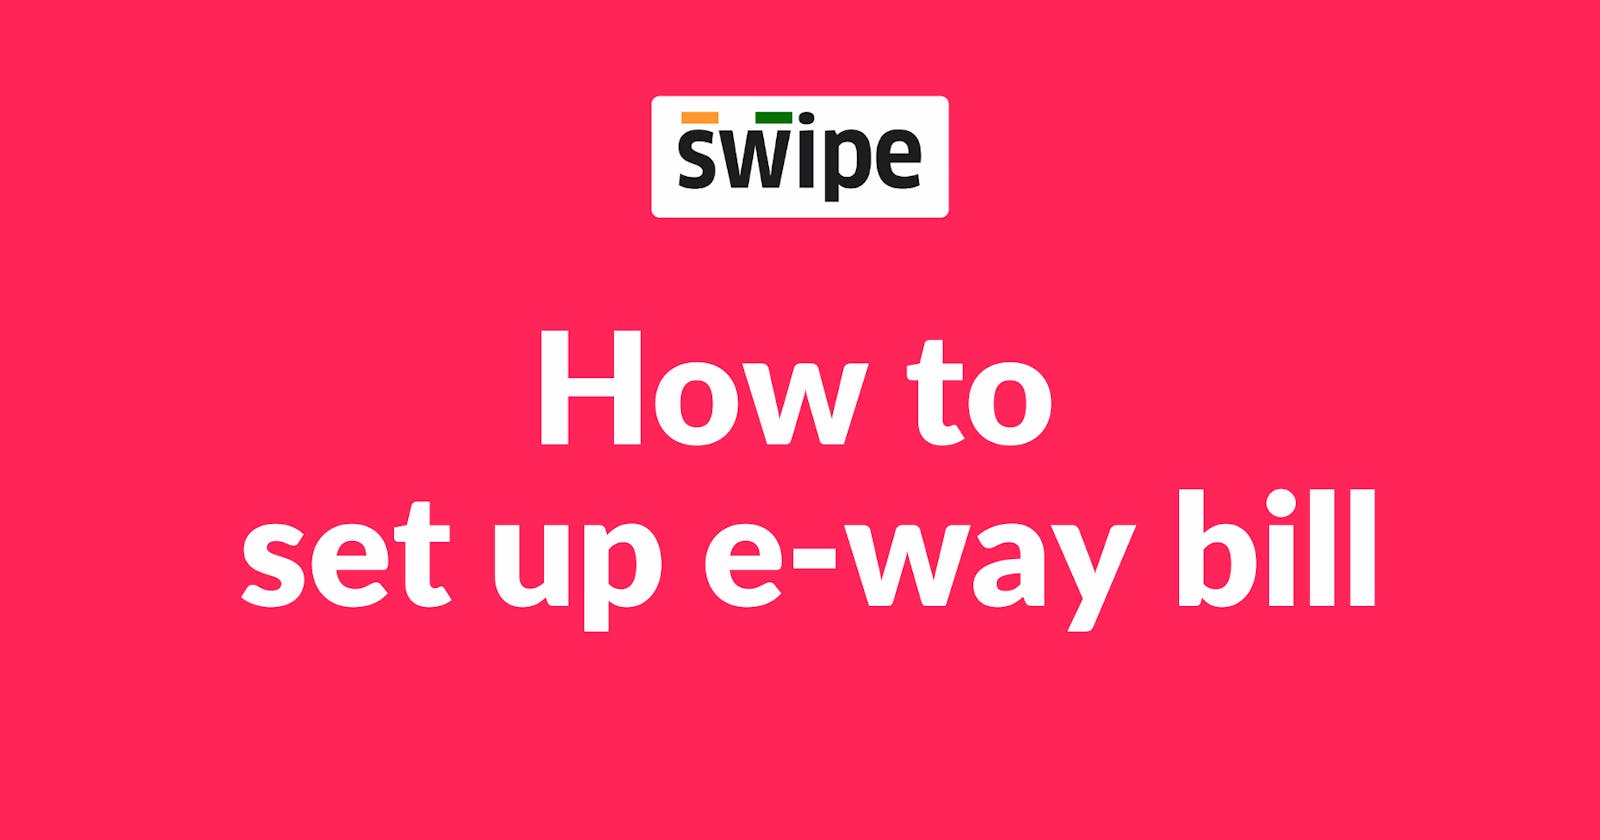 A step-by-step guide to E-Way Bill integration